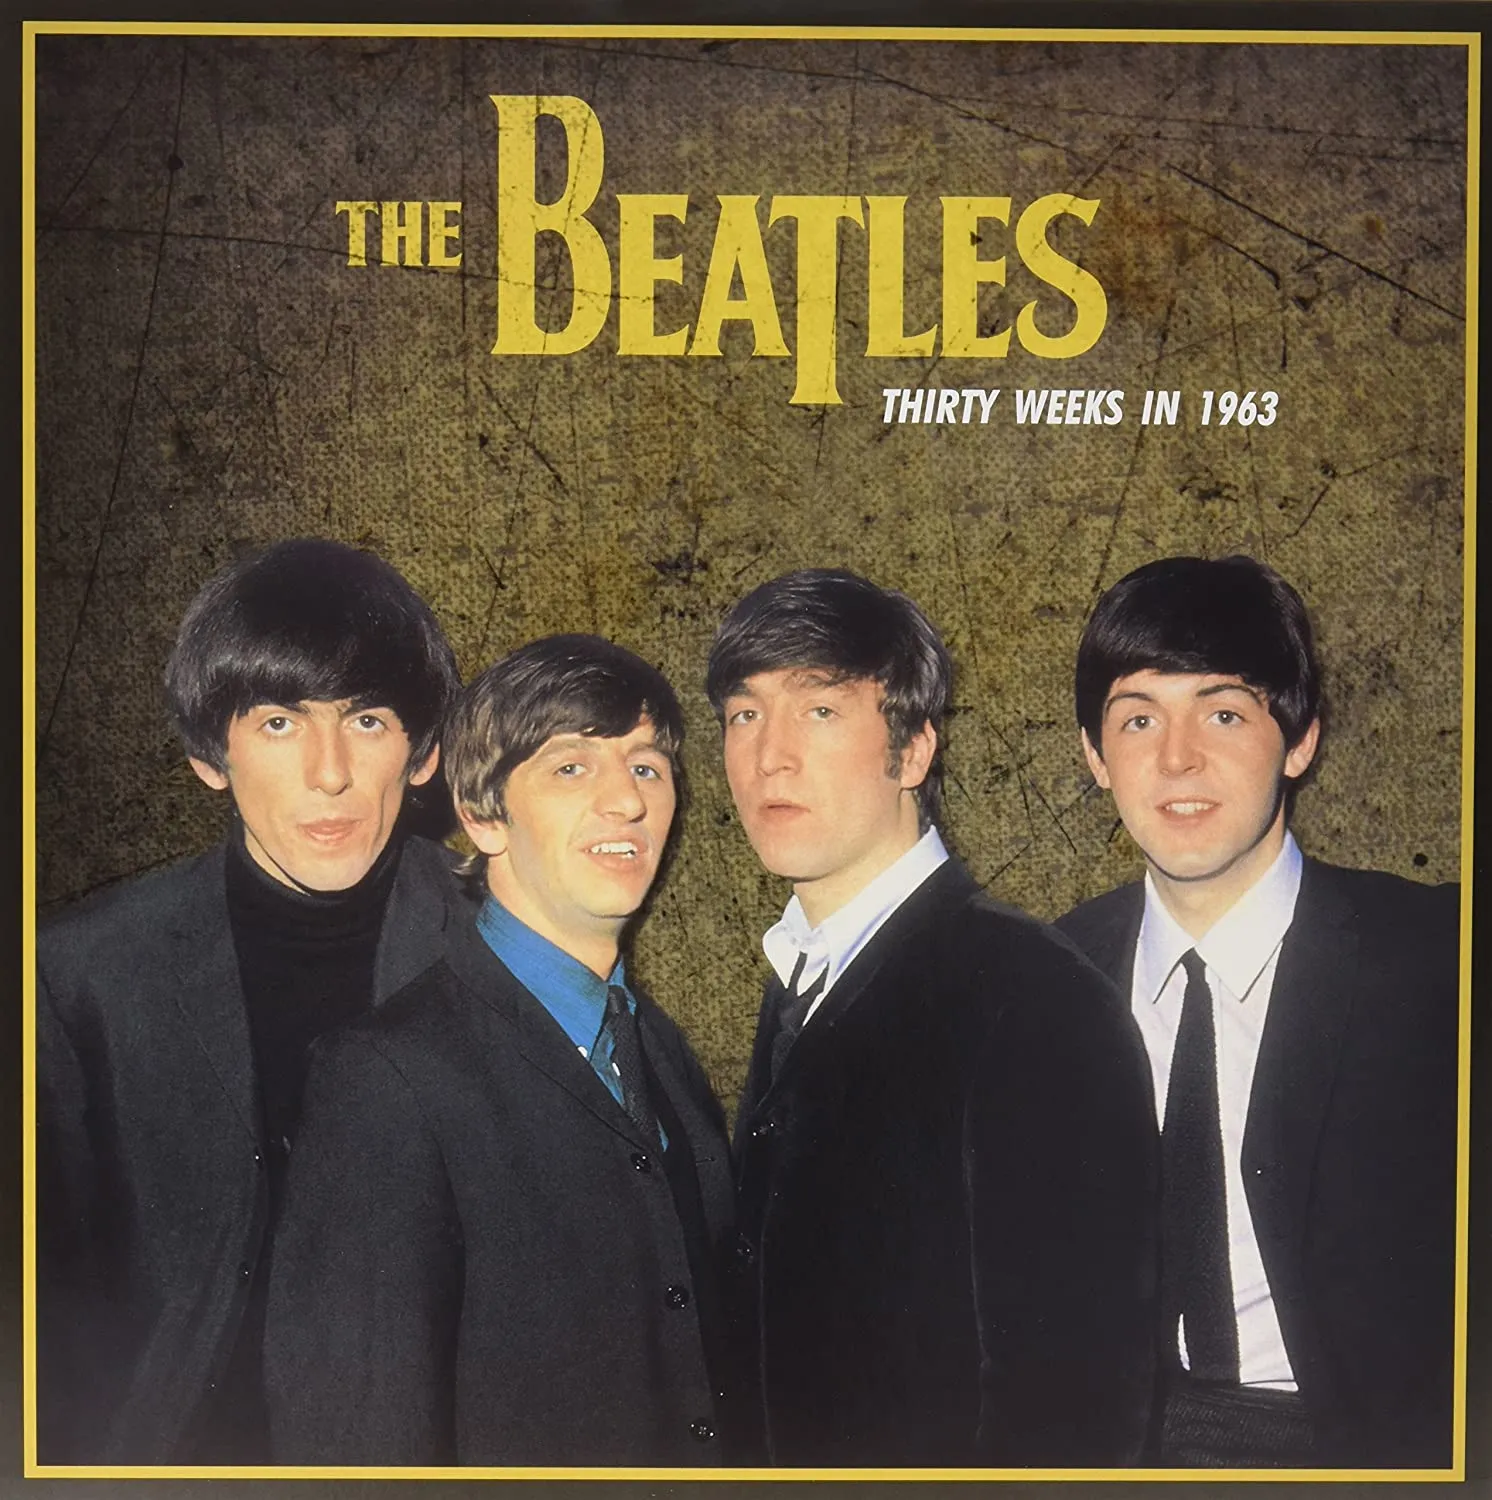 <strong>The Beatles - Thirty Weeks in 1963</strong> (Vinyl LP - black)